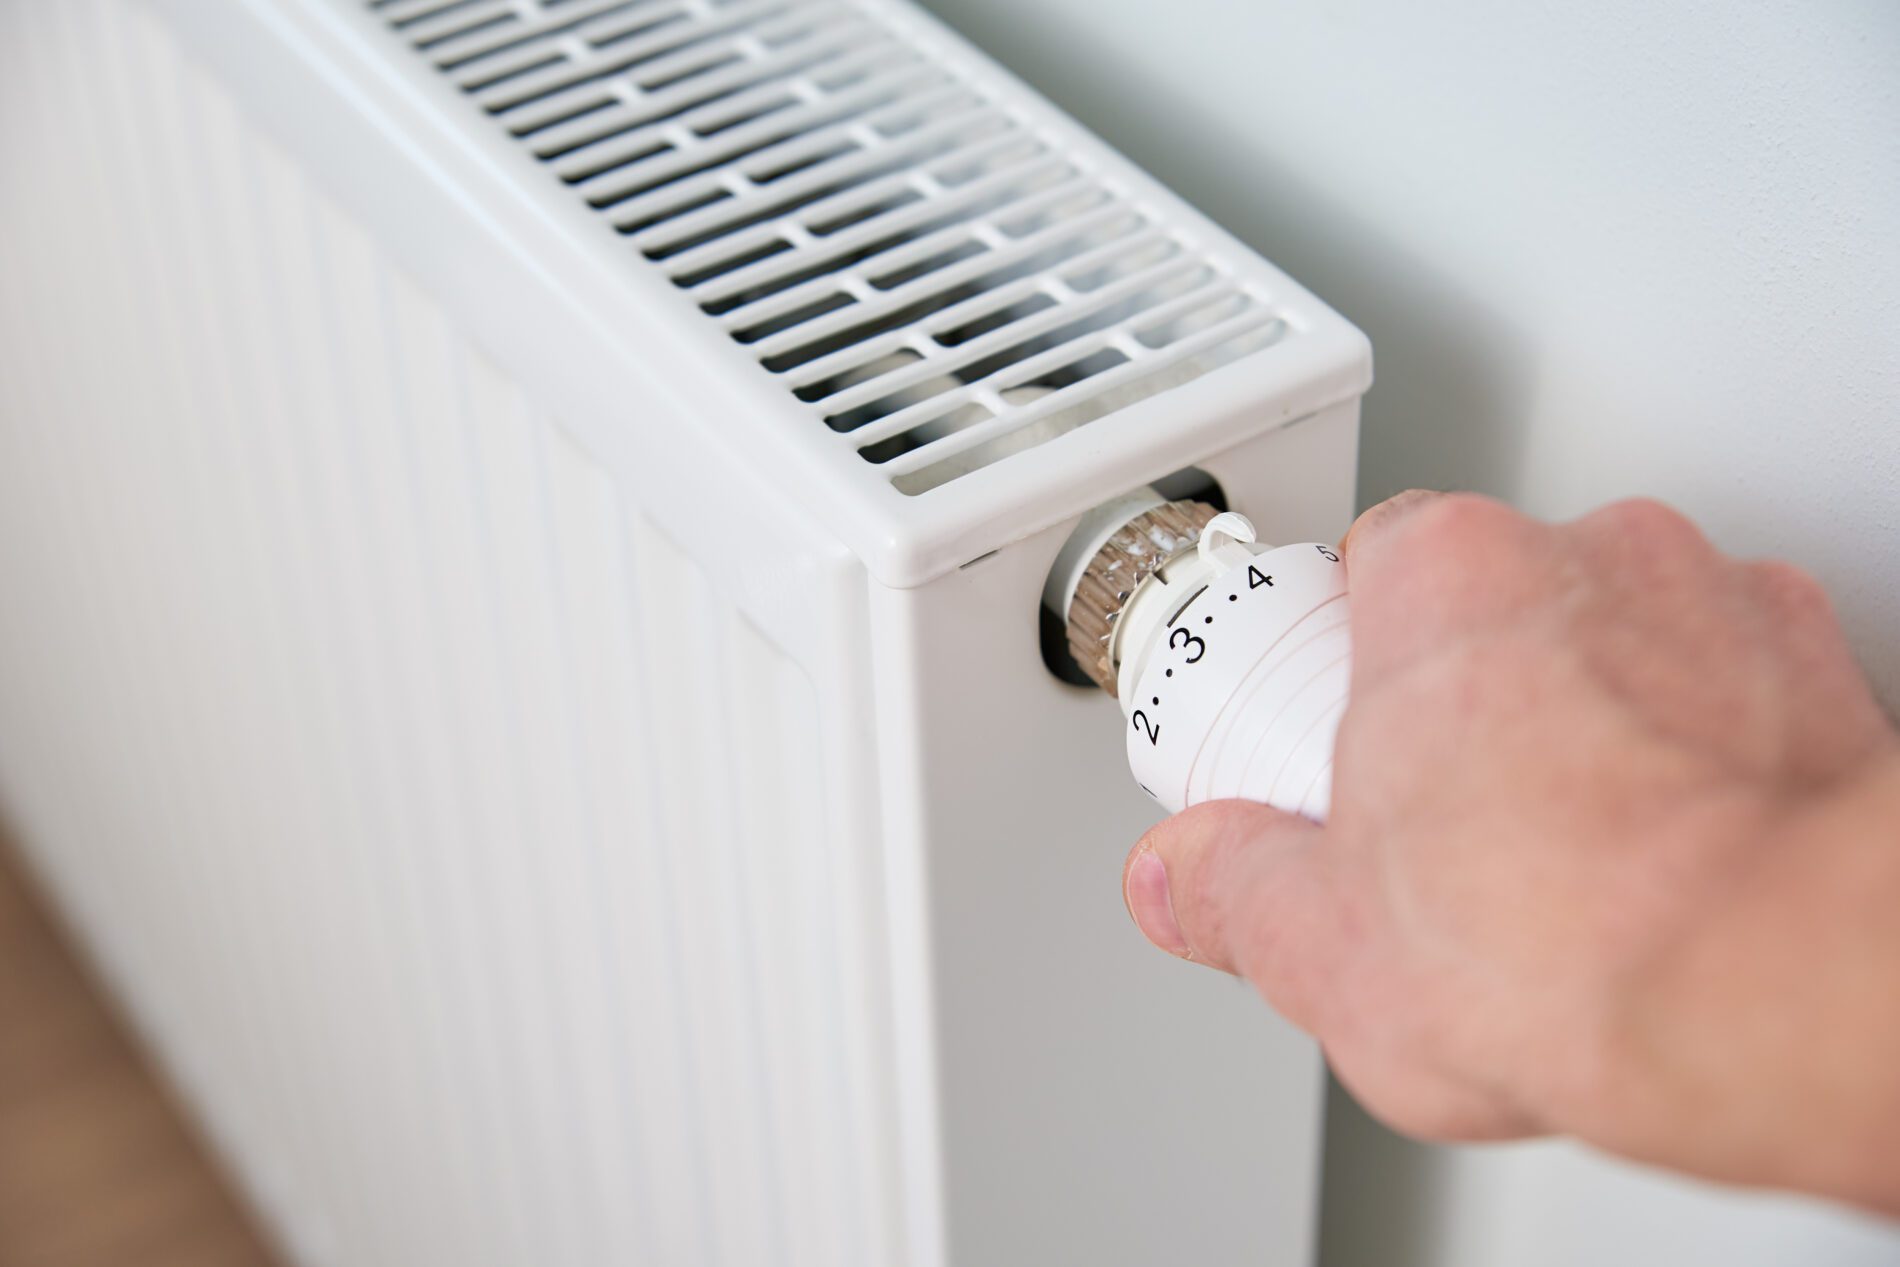 Is your thermostat not reaching set temperature?